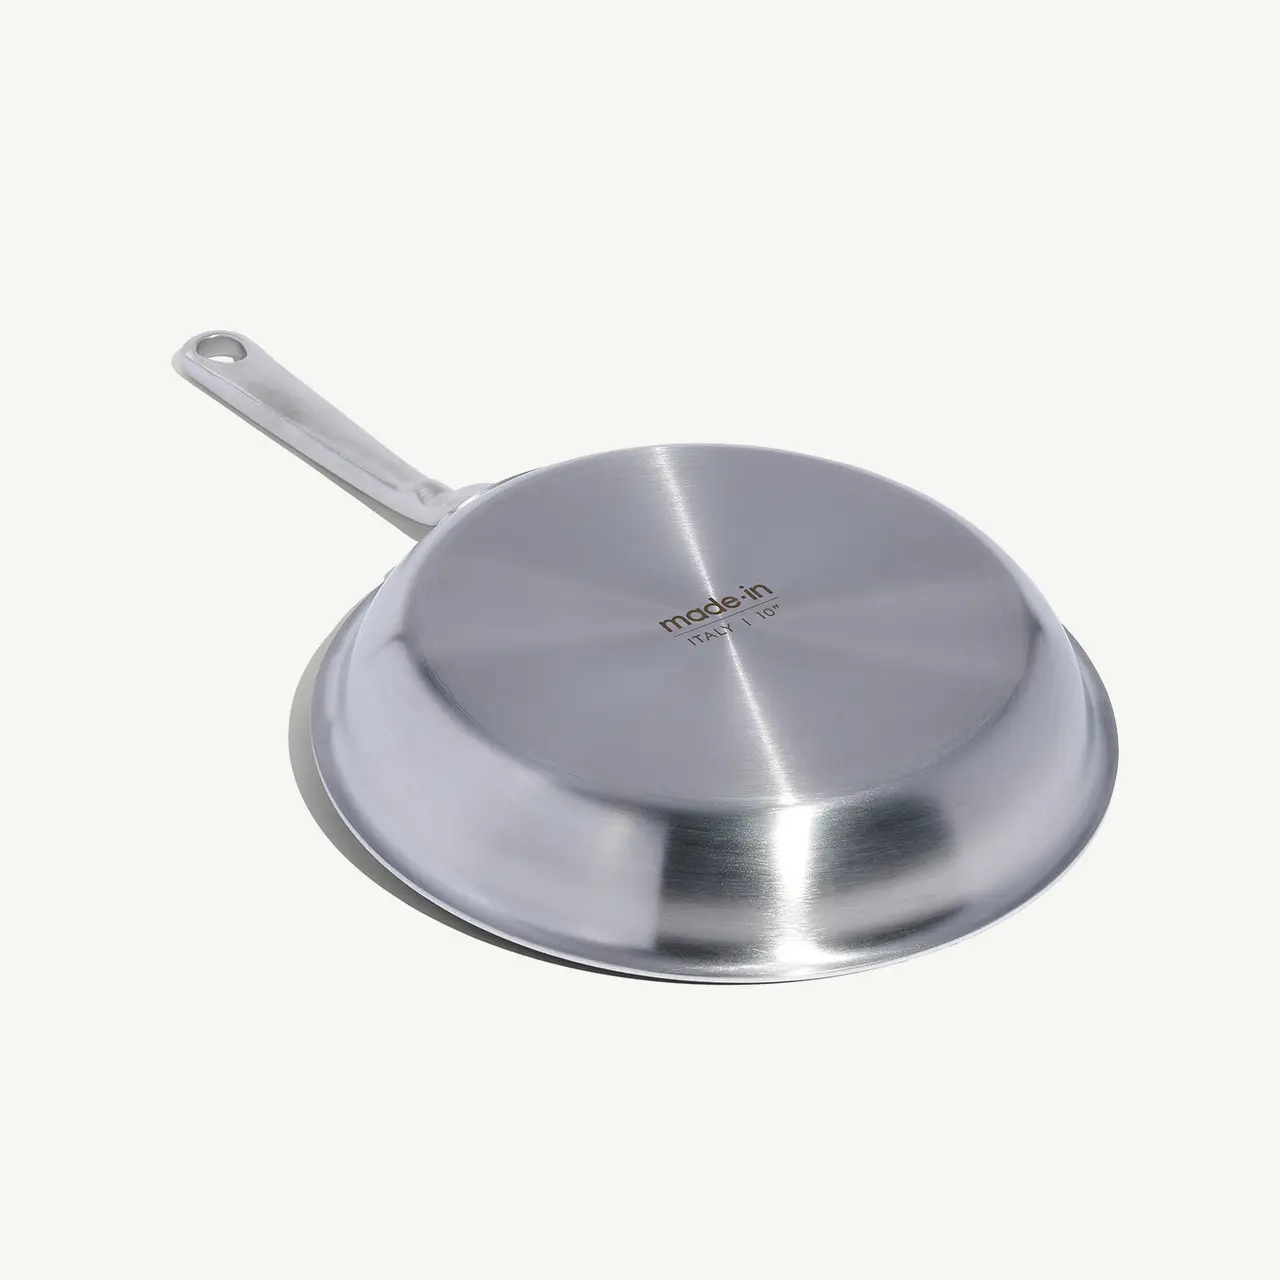 A stainless steel frying pan with a long handle is displayed against a white background.